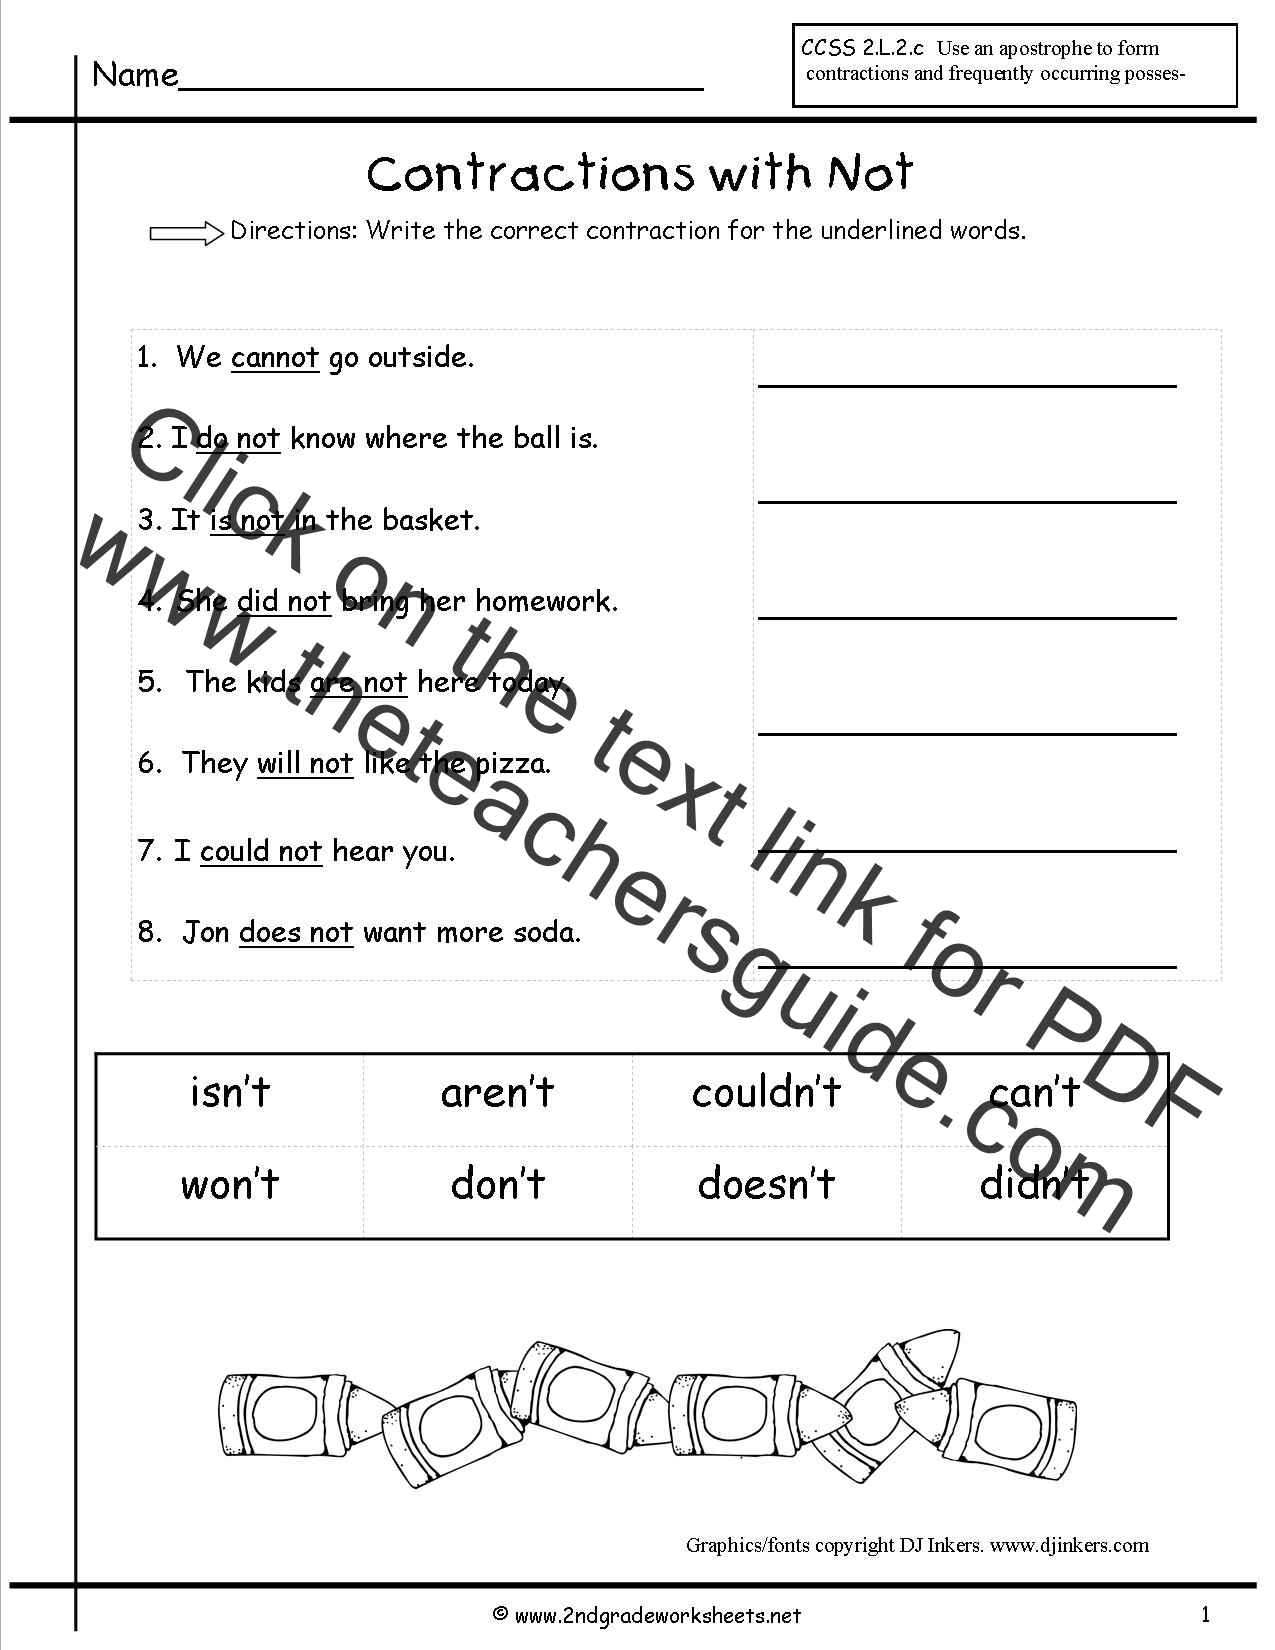 Free Contractions Worksheets and Printouts Within Contractions Worksheet 2nd Grade